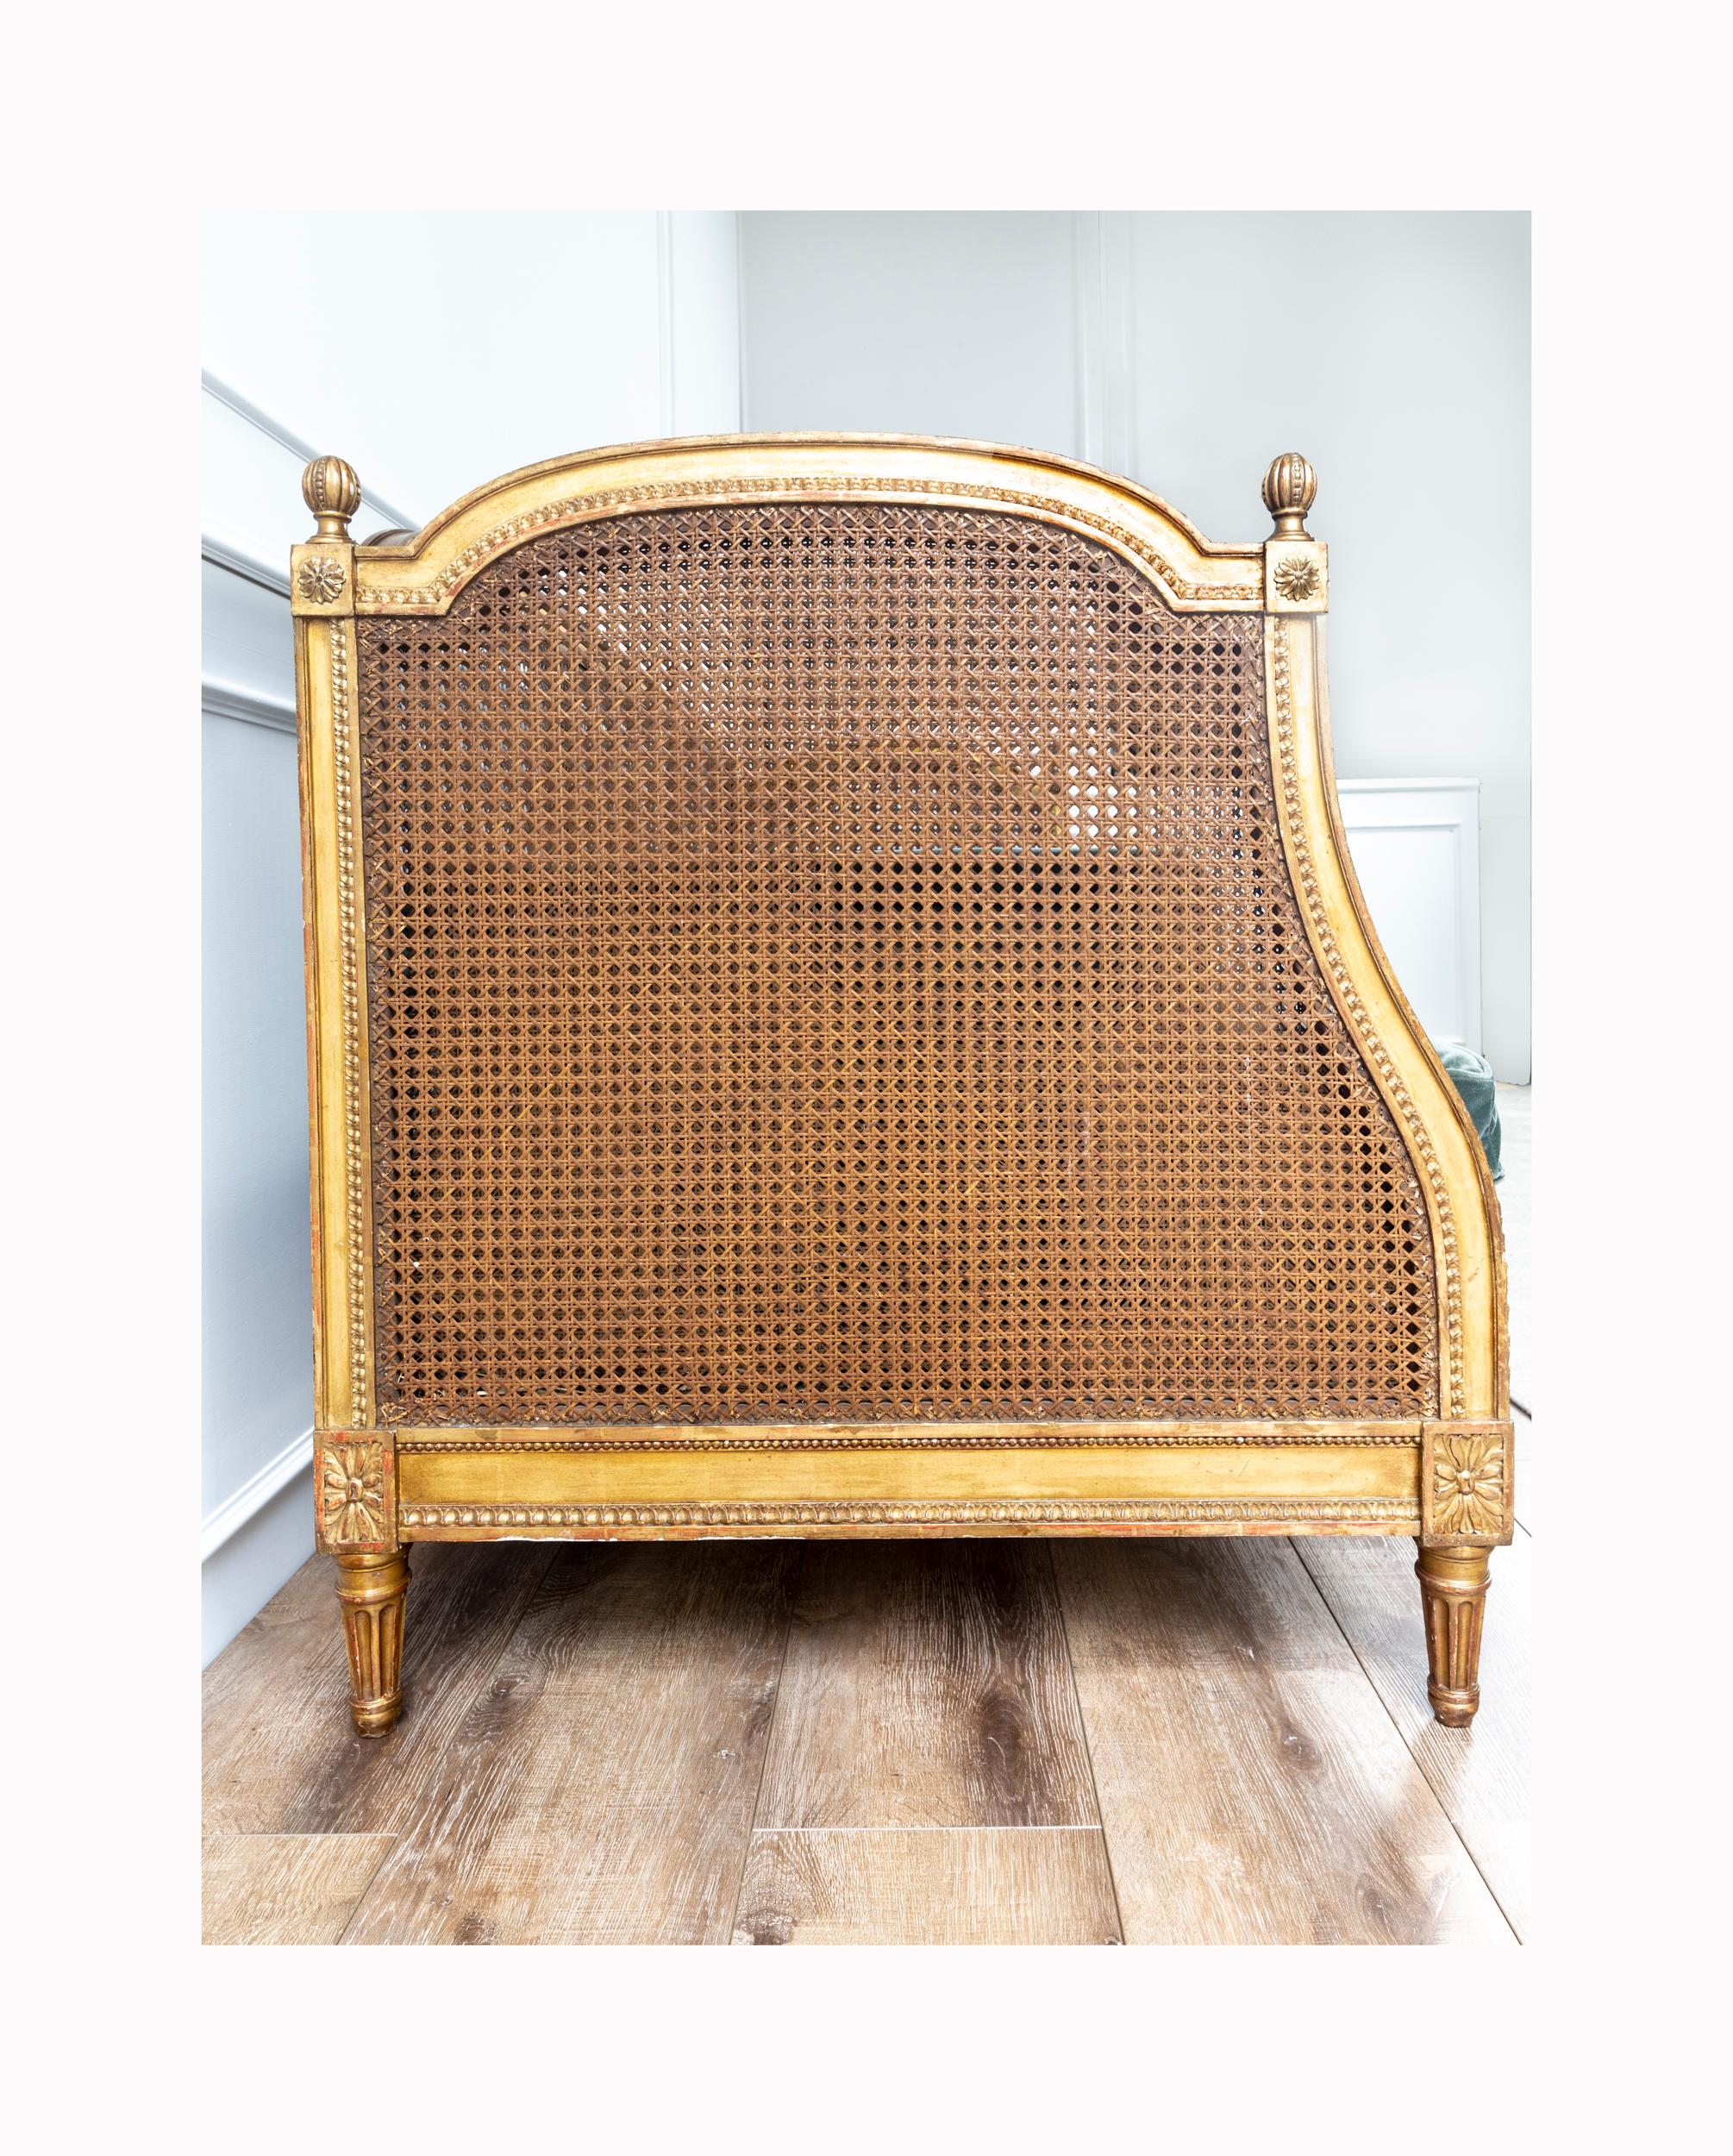 French 18th Century Louis XVI Giltwood and Caned Settee with New Upholstery For Sale 4